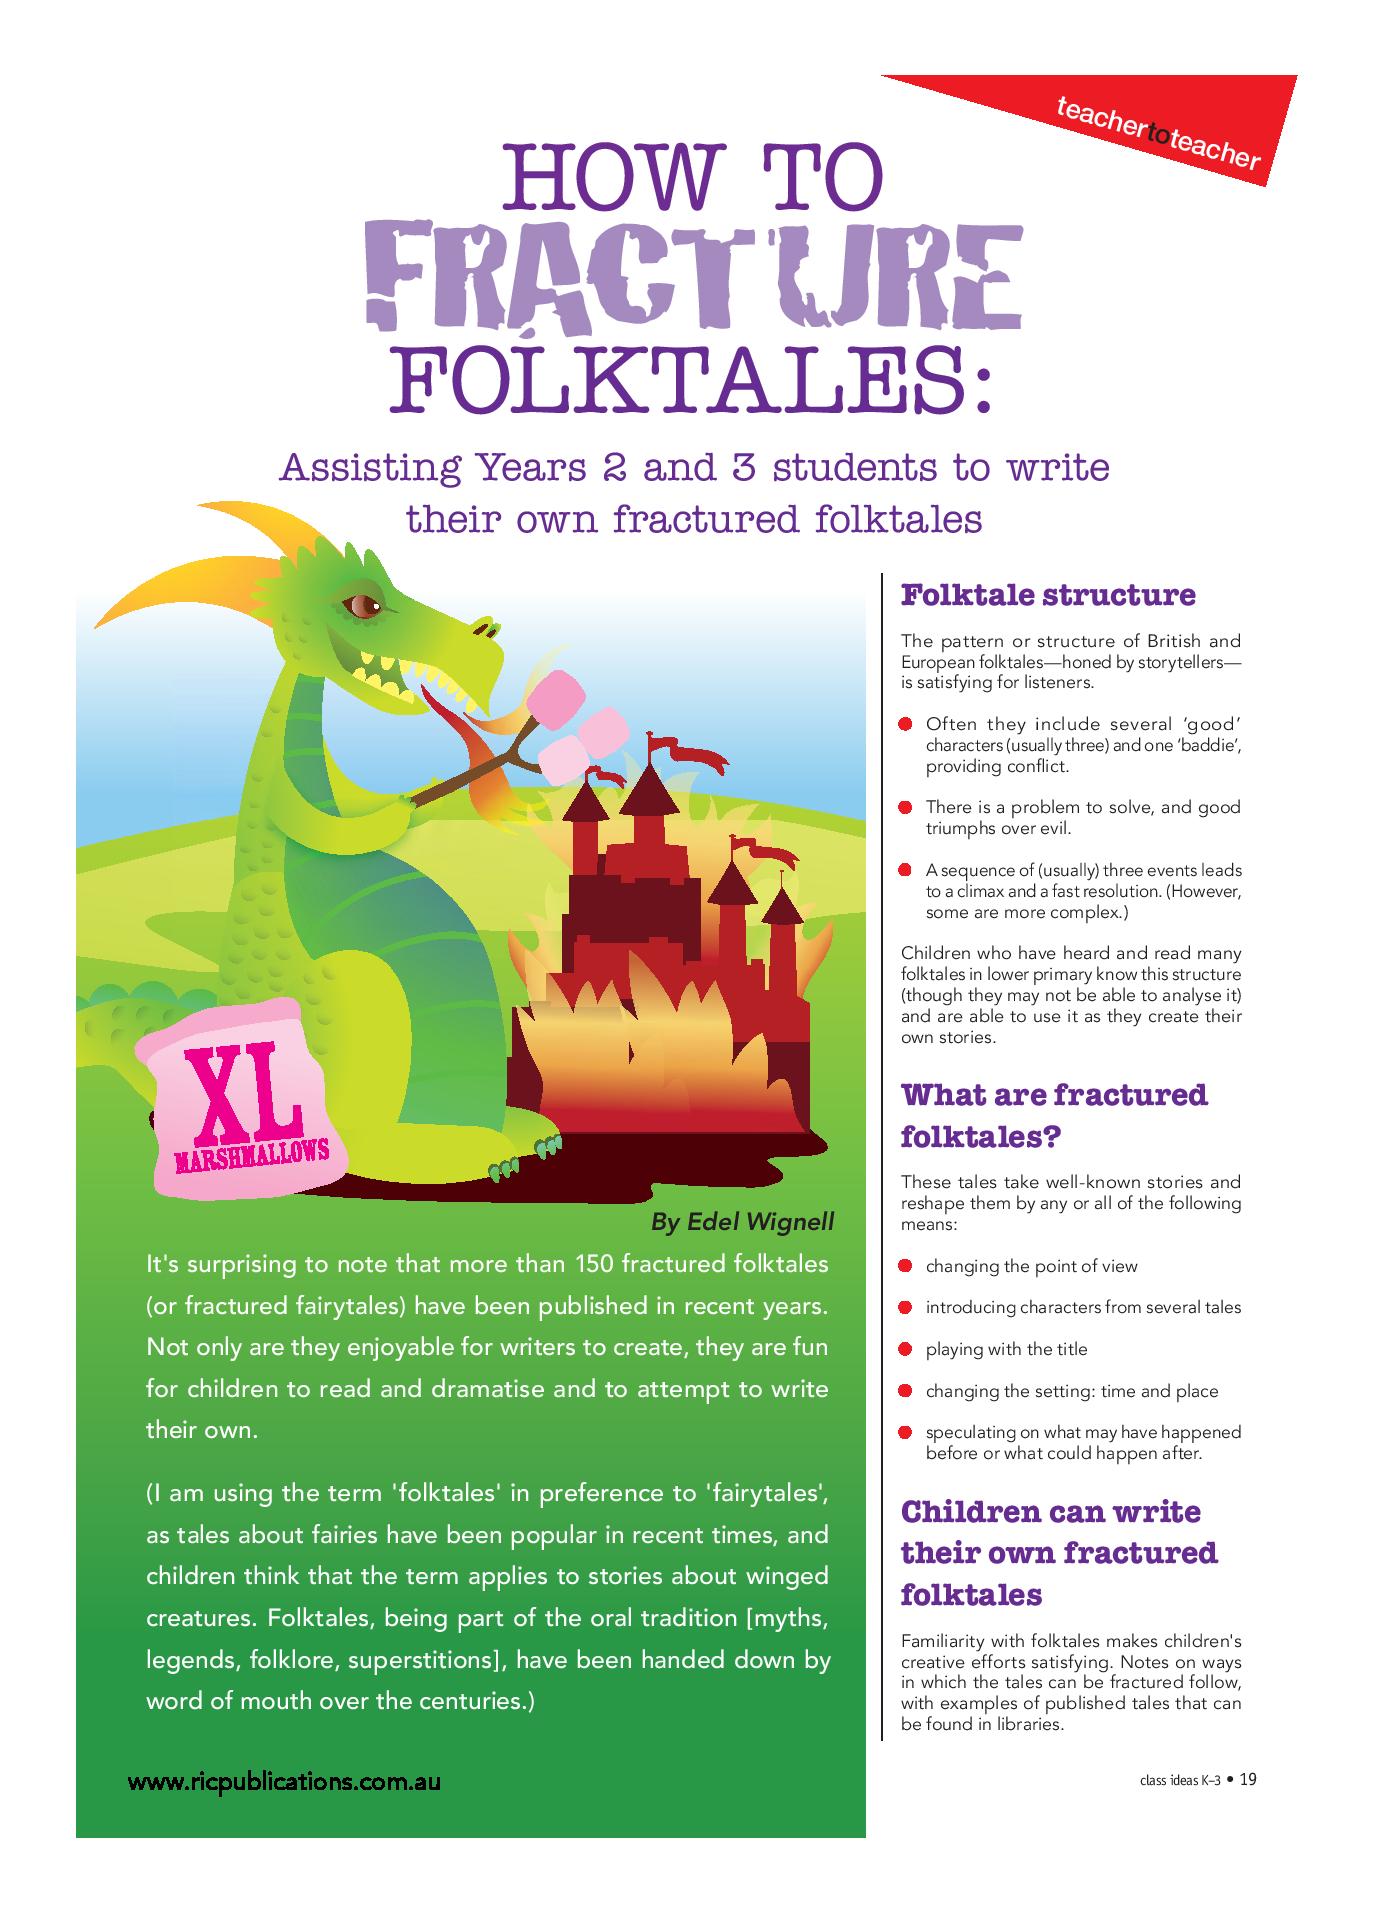 Fractured fairytales free resource from RIC Publications-page-001